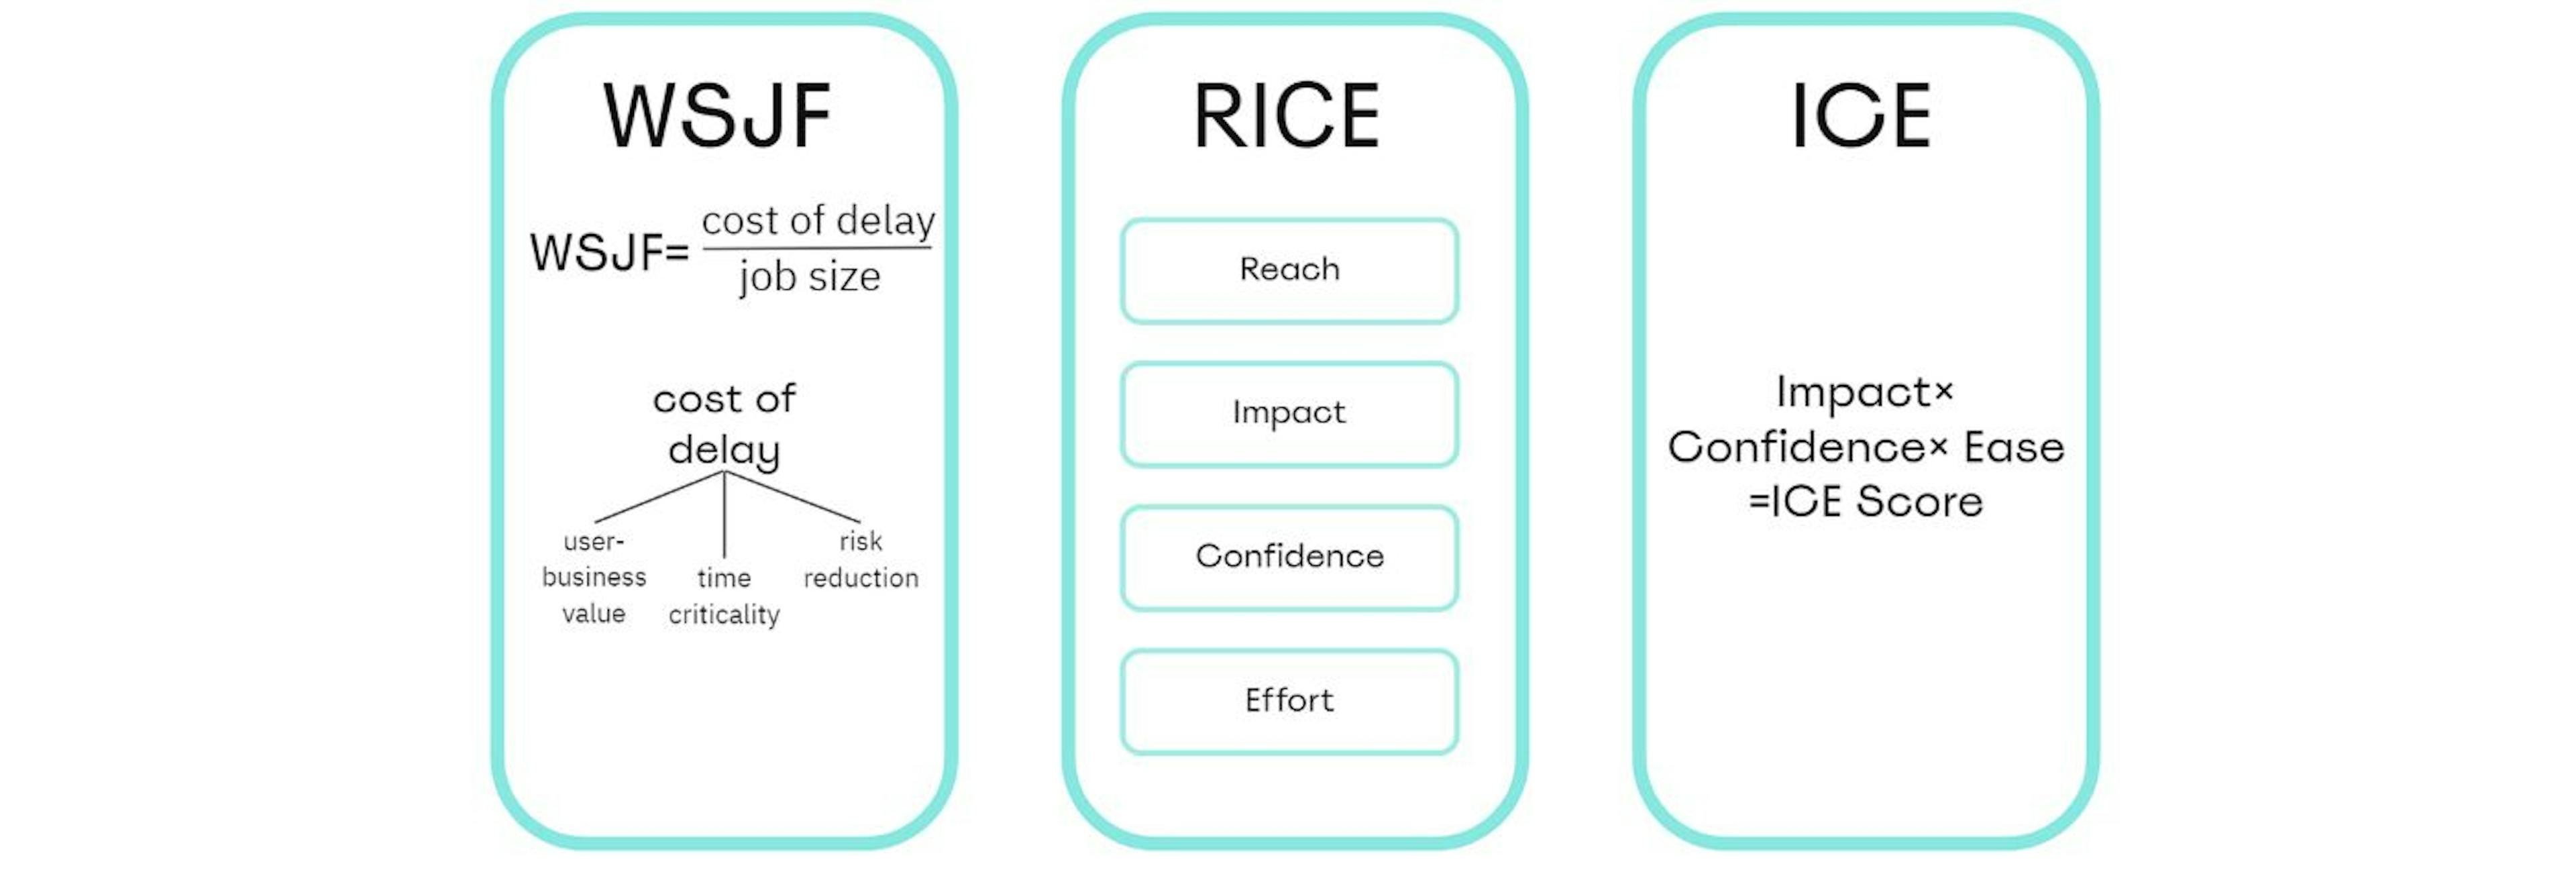 featured image - ICE, RICE, WSJF or How to Organize Your Backlog Effectively